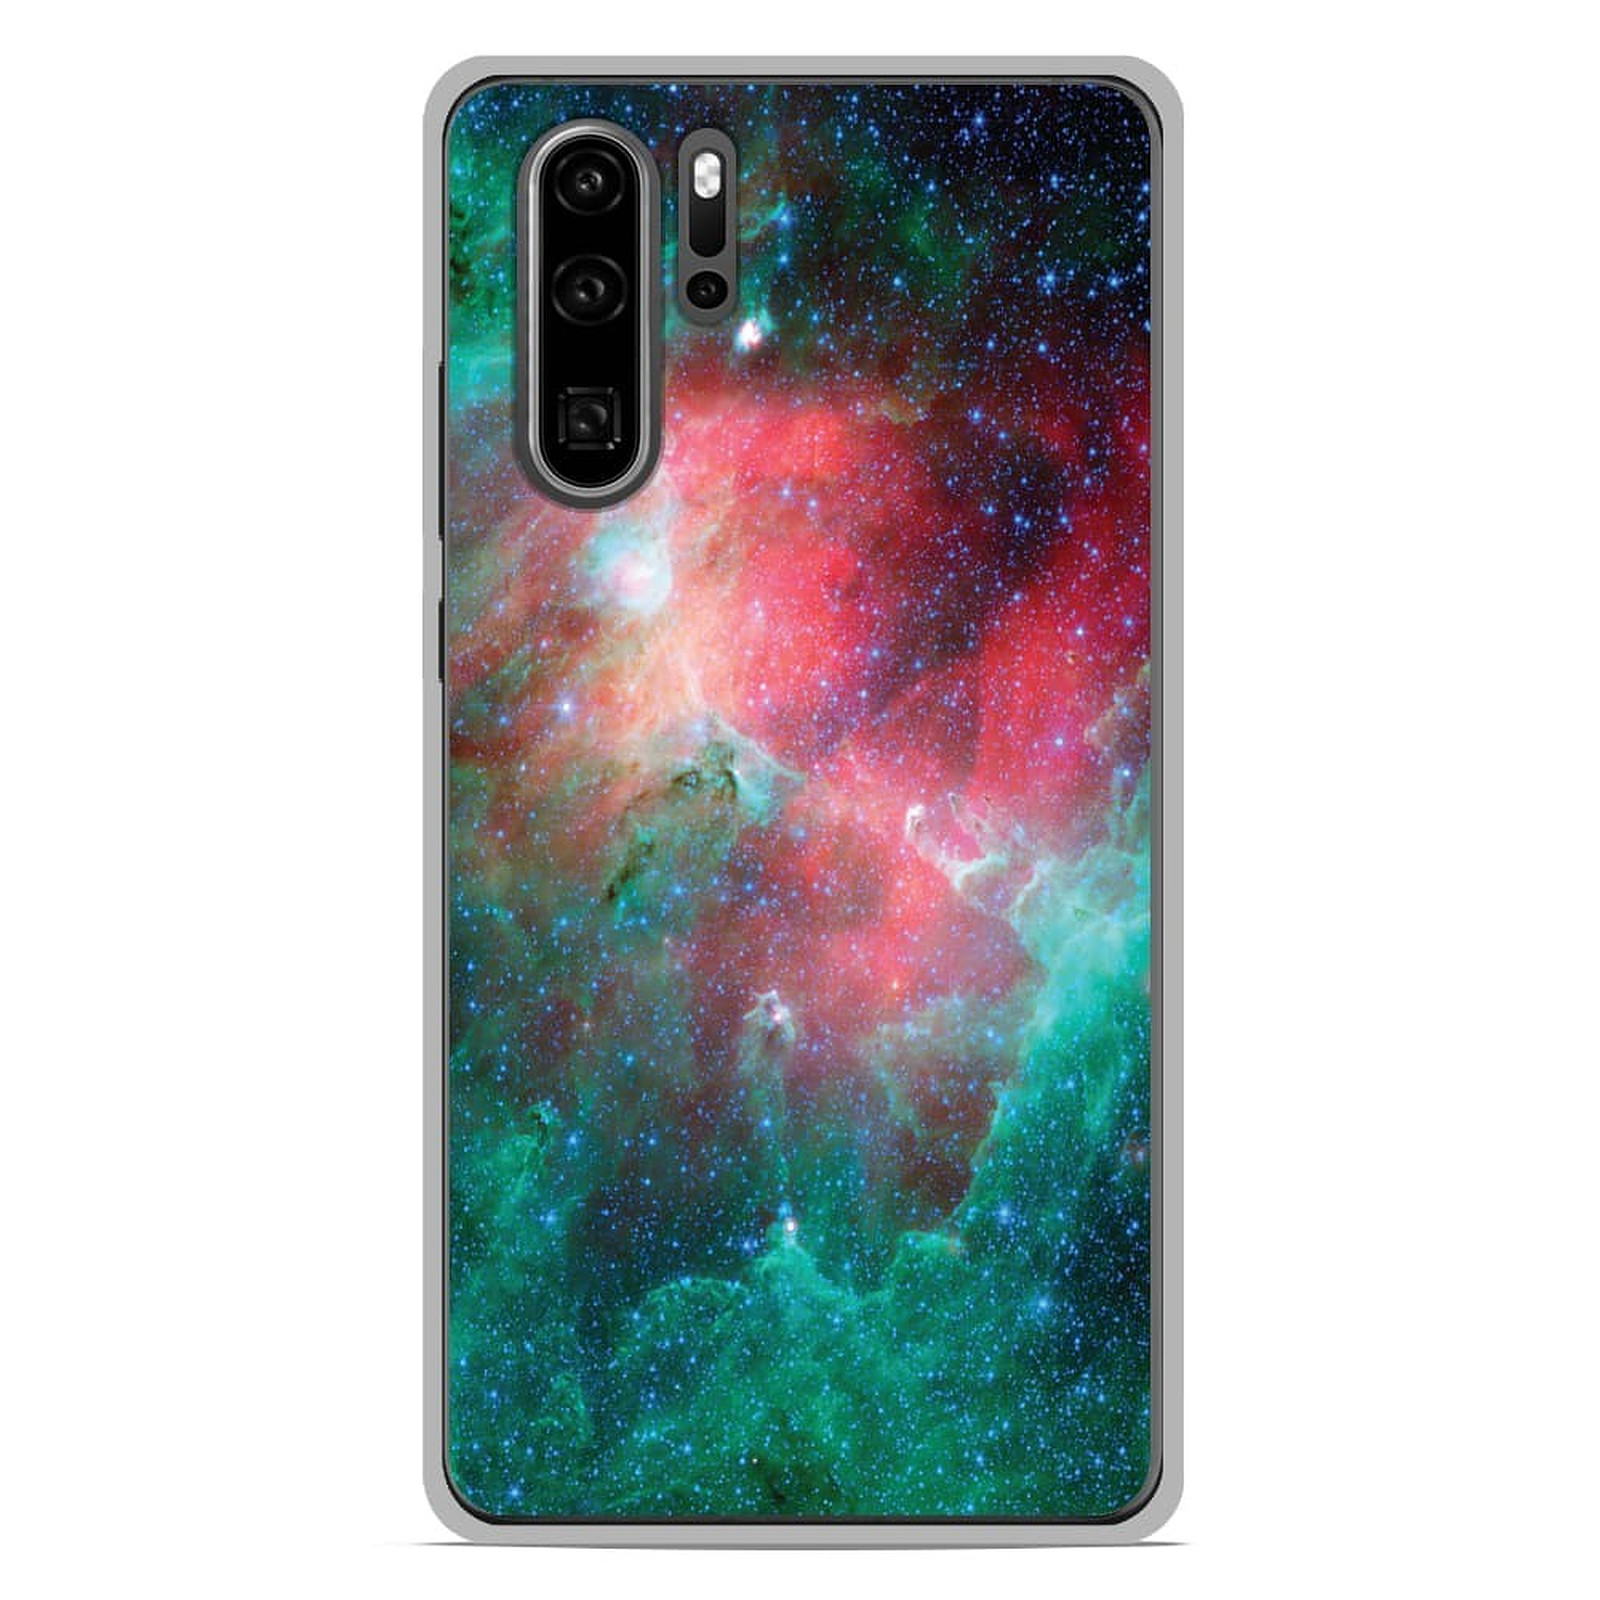 1001 Coques Coque silicone gel Huawei P30 Pro motif Nebuleuse - Coque telephone 1001Coques